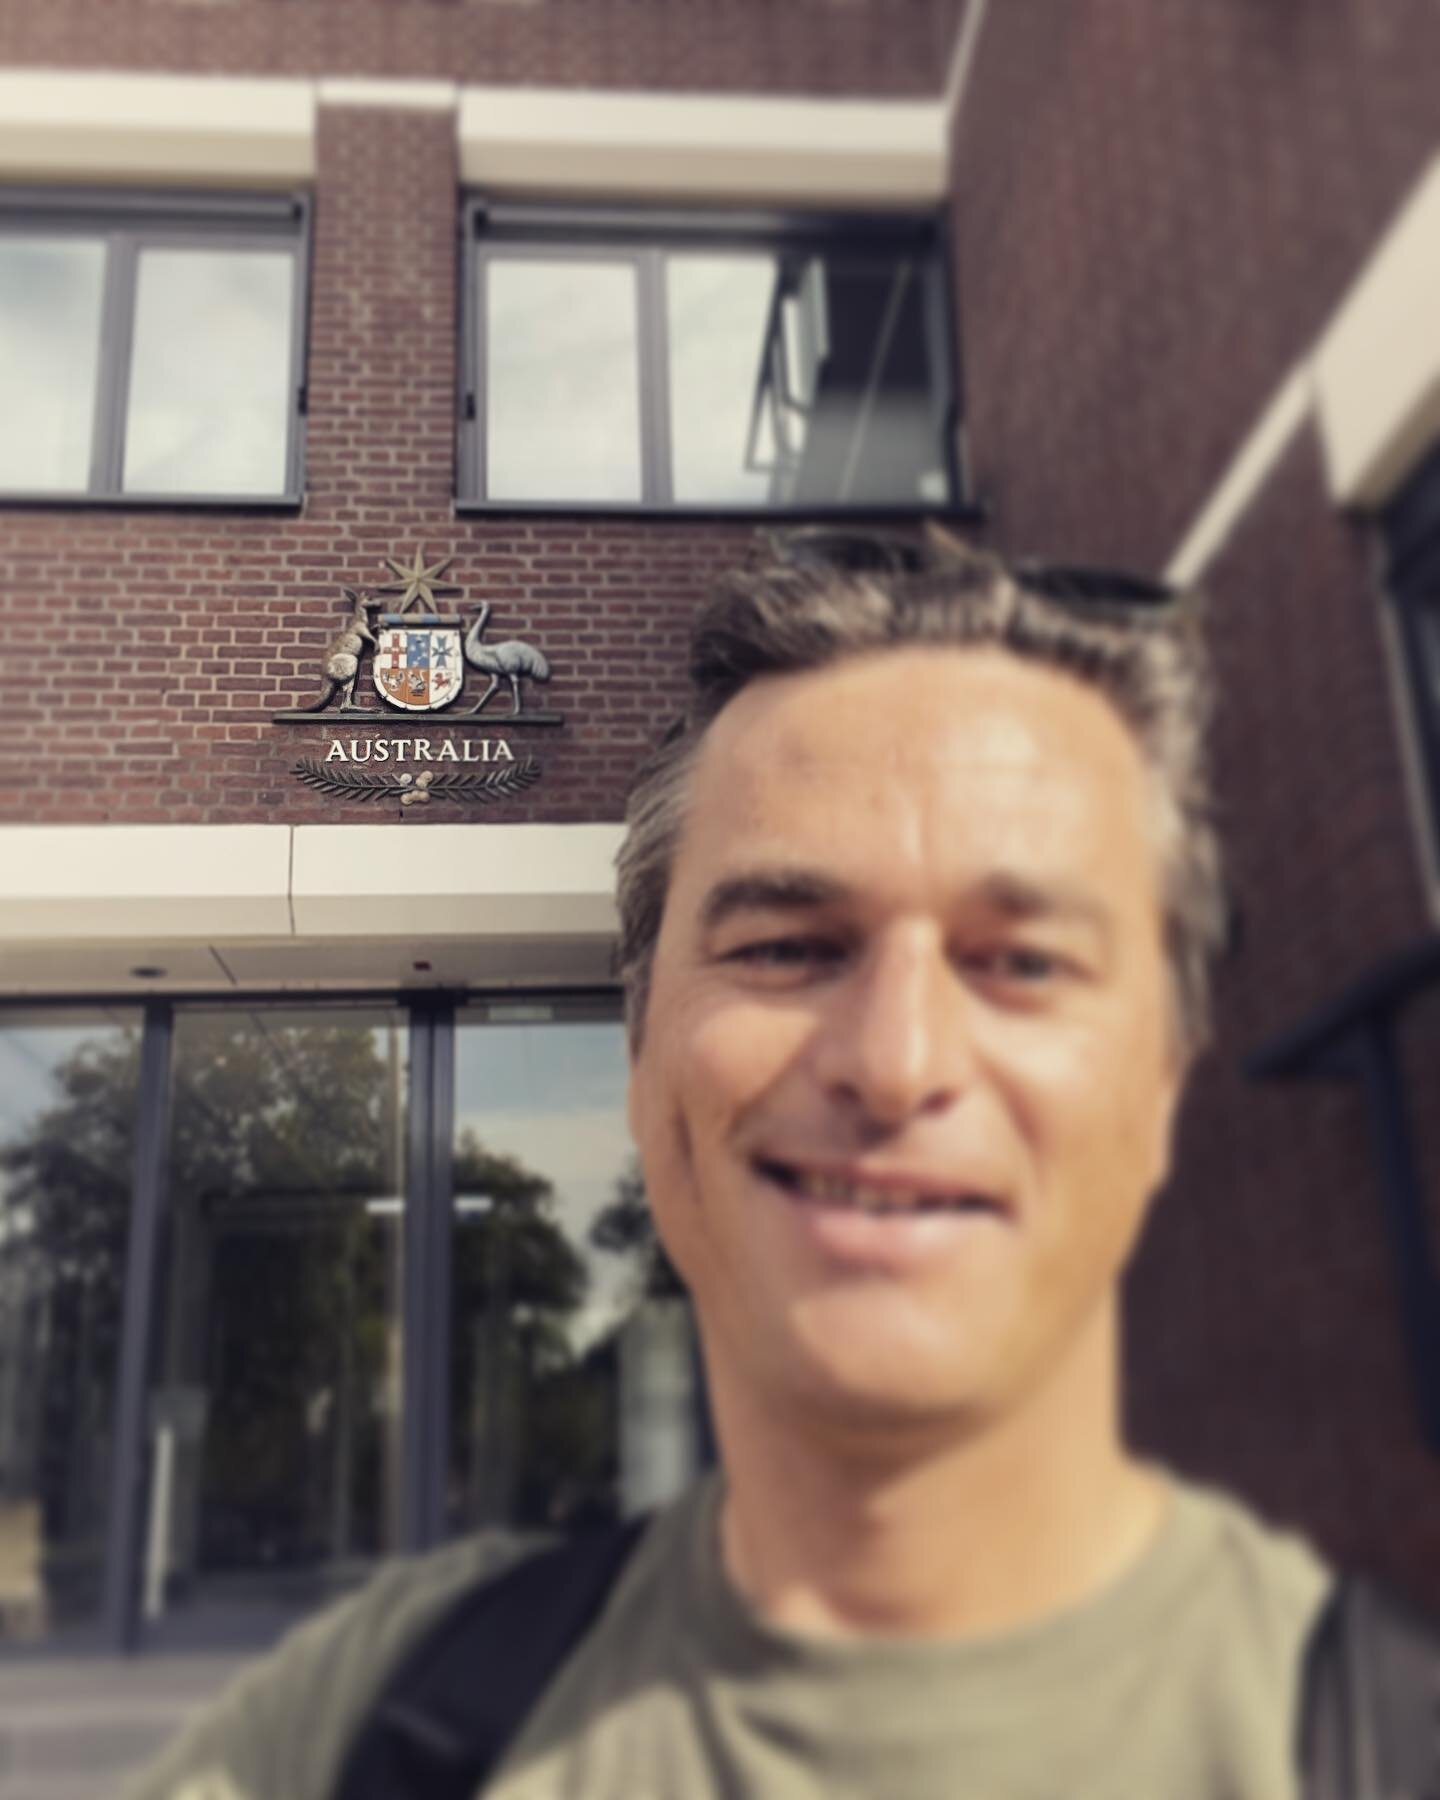 Voted YES today in Den Haag, Netherlands. 

I have learnt, and continue to learn, so much from Indigenous Australians about the place I call home. With love and unity in mind we can offer an optimistic future and combine our knowledge to create the L